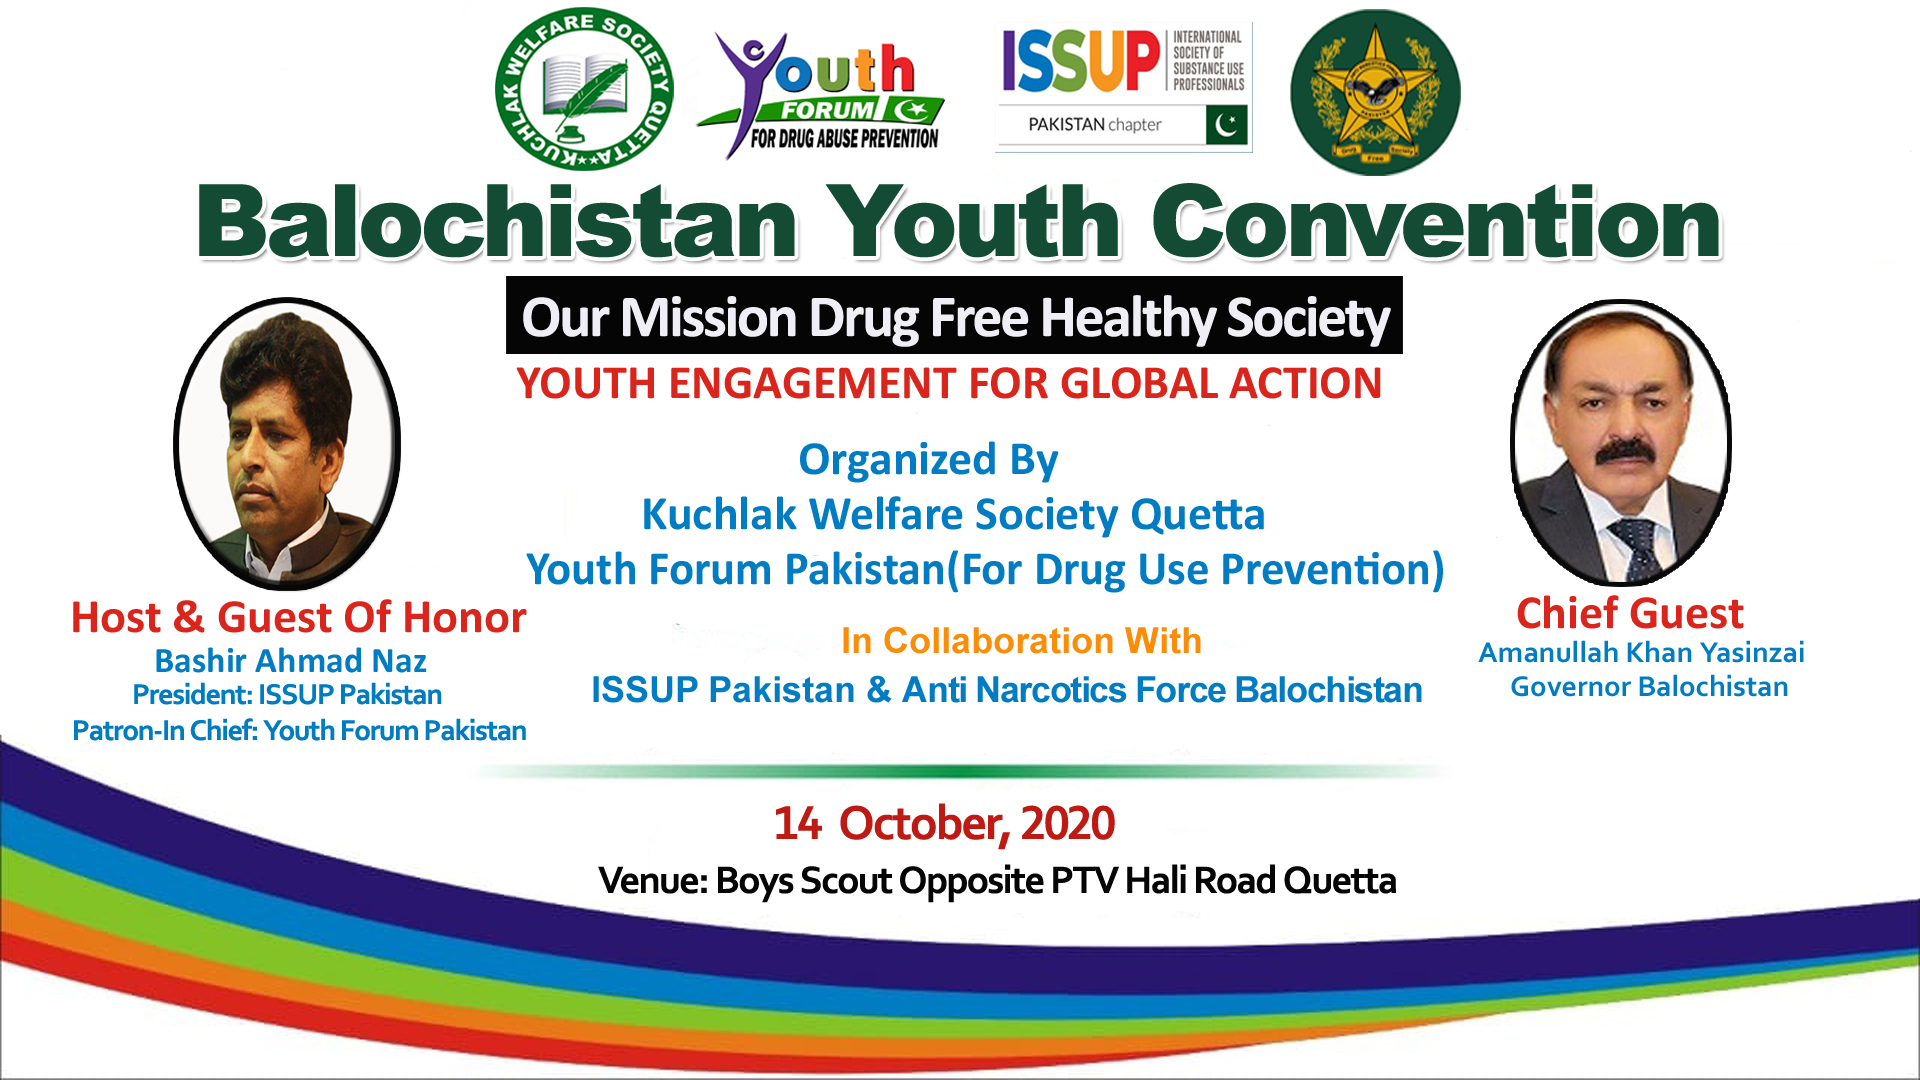 BALOCHISTAN YOUTH CONVENTION BY KUCHLAK WELFARE SOCIETY, YOUTH FORUM PAKISTAN, ISSUP PAKISTAN CHAPTER AND ANTI NARCOTICS FORCE BALOCHISTAN On 14TH OCTOBER, 2020 AT QUETTA-BALOCHISTAN.